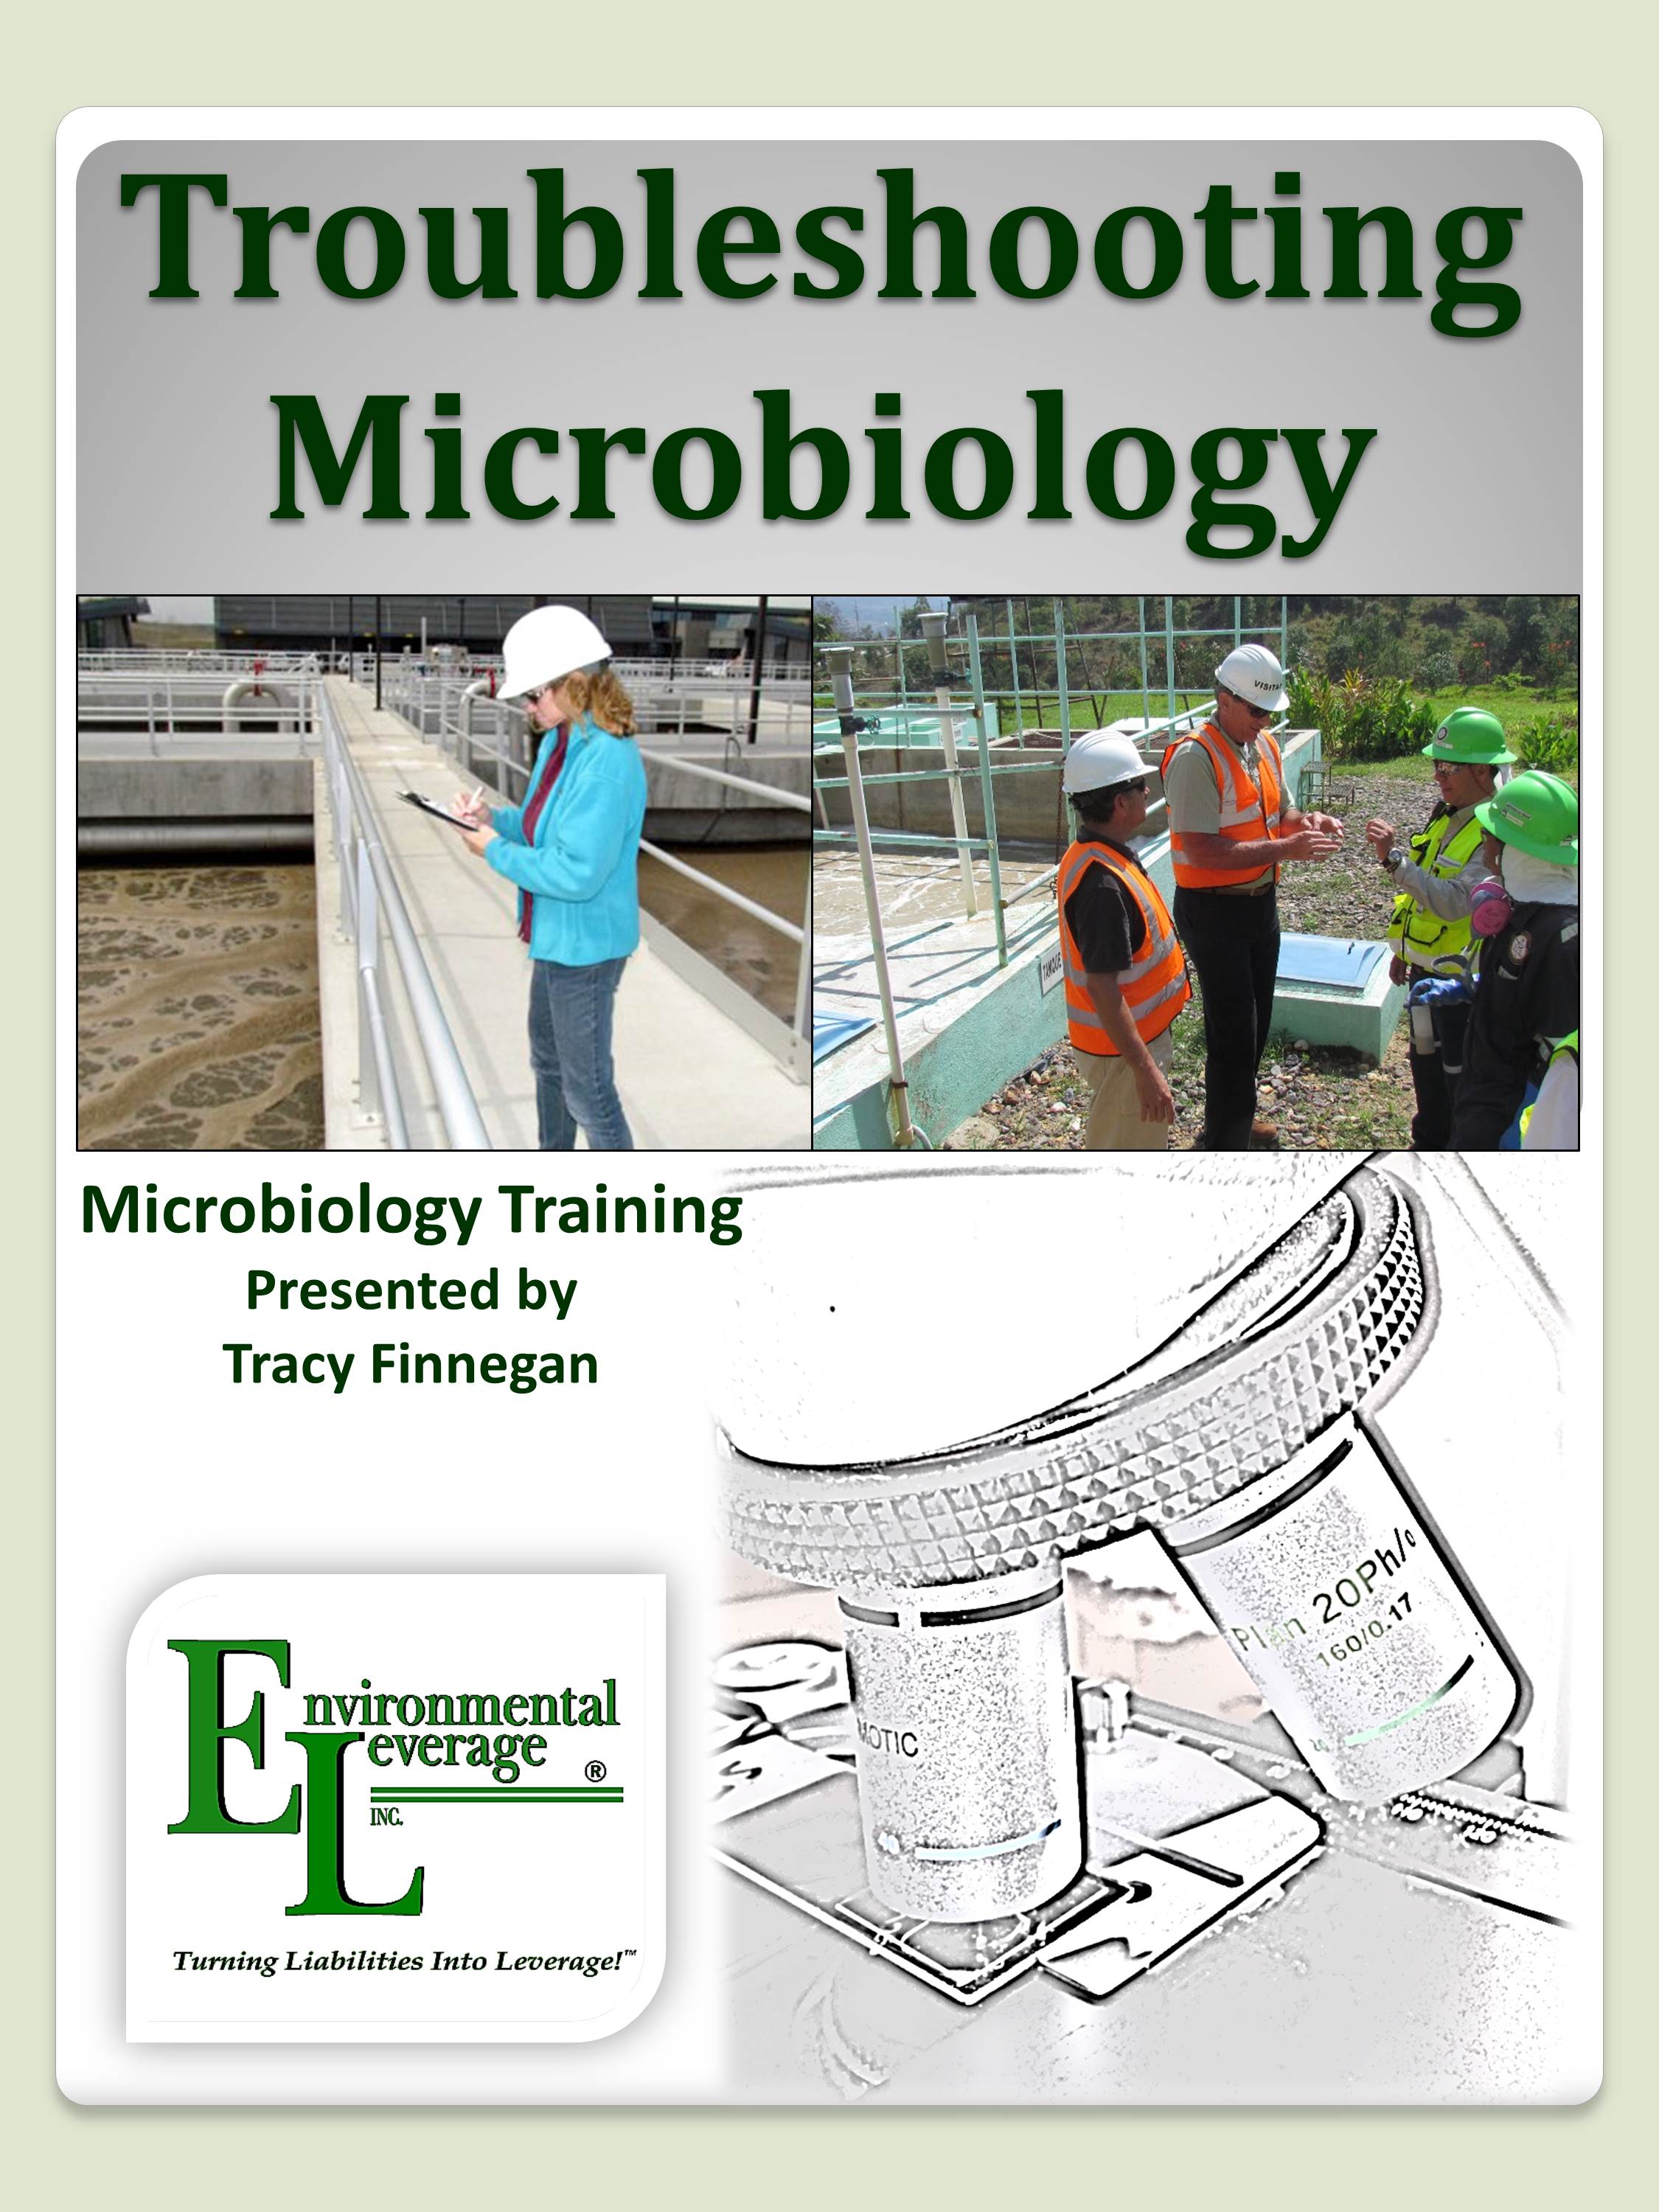 Troubleshooting wastewater microbiology